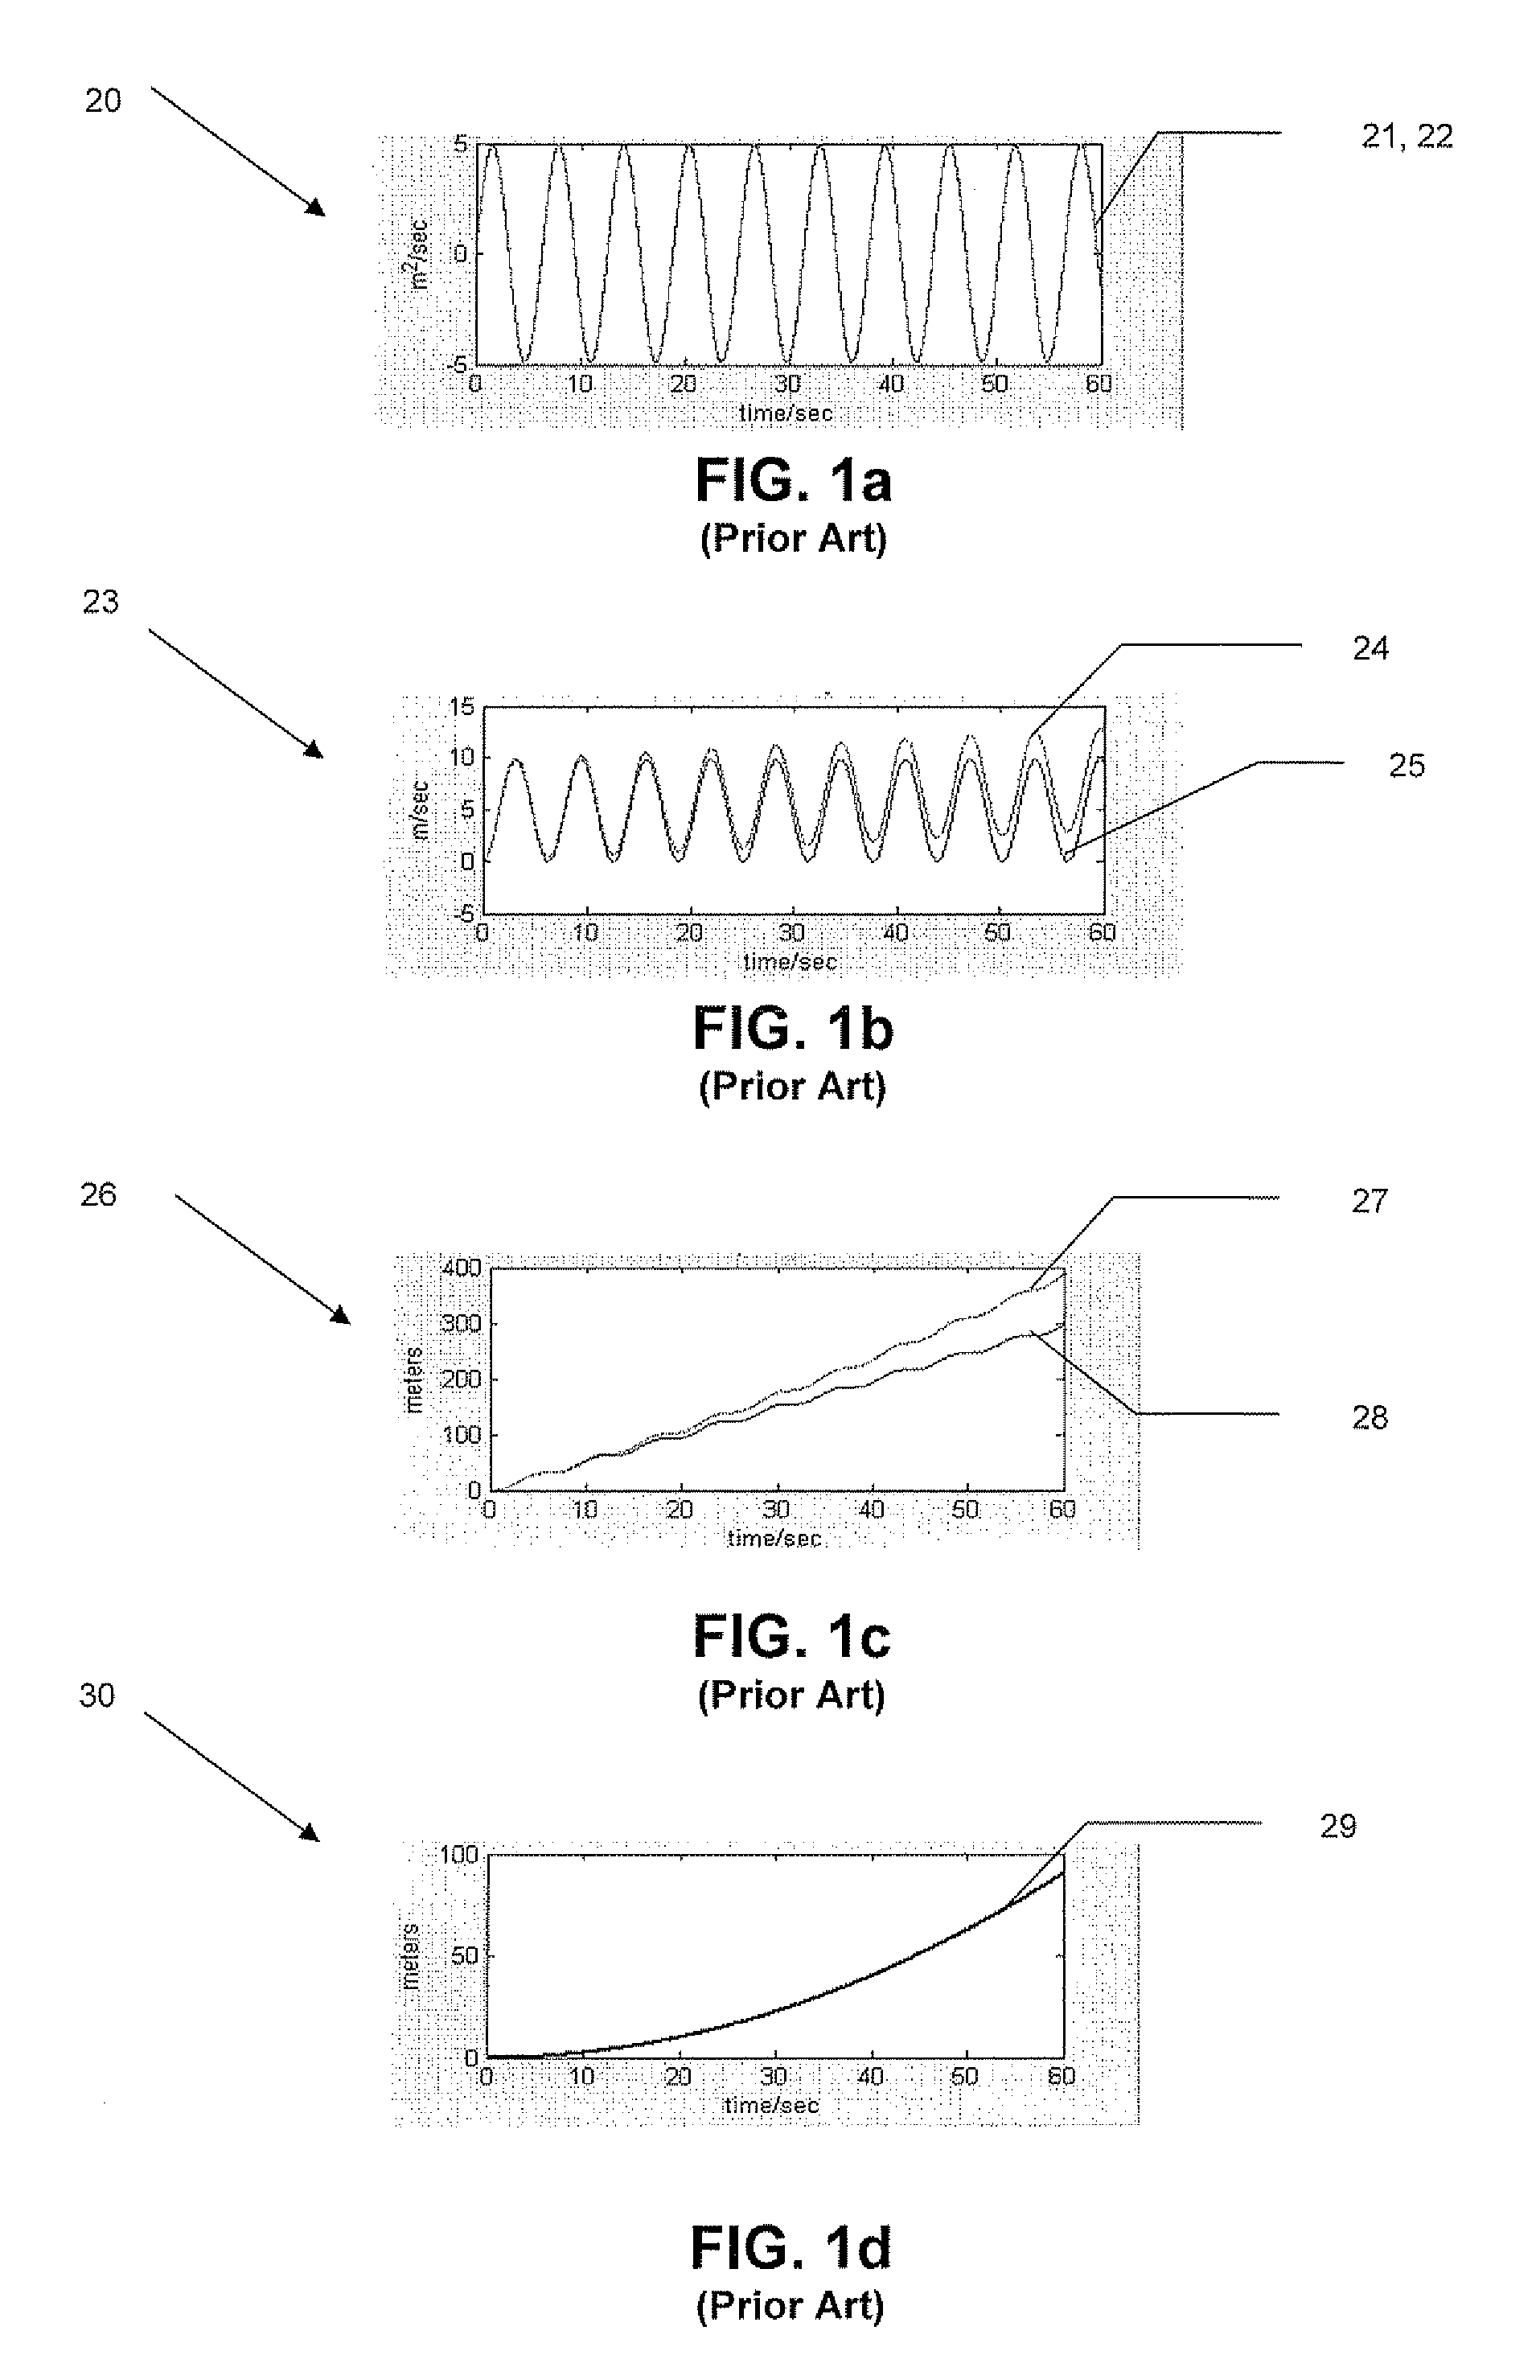 Electronic navigation device for a human and related methods